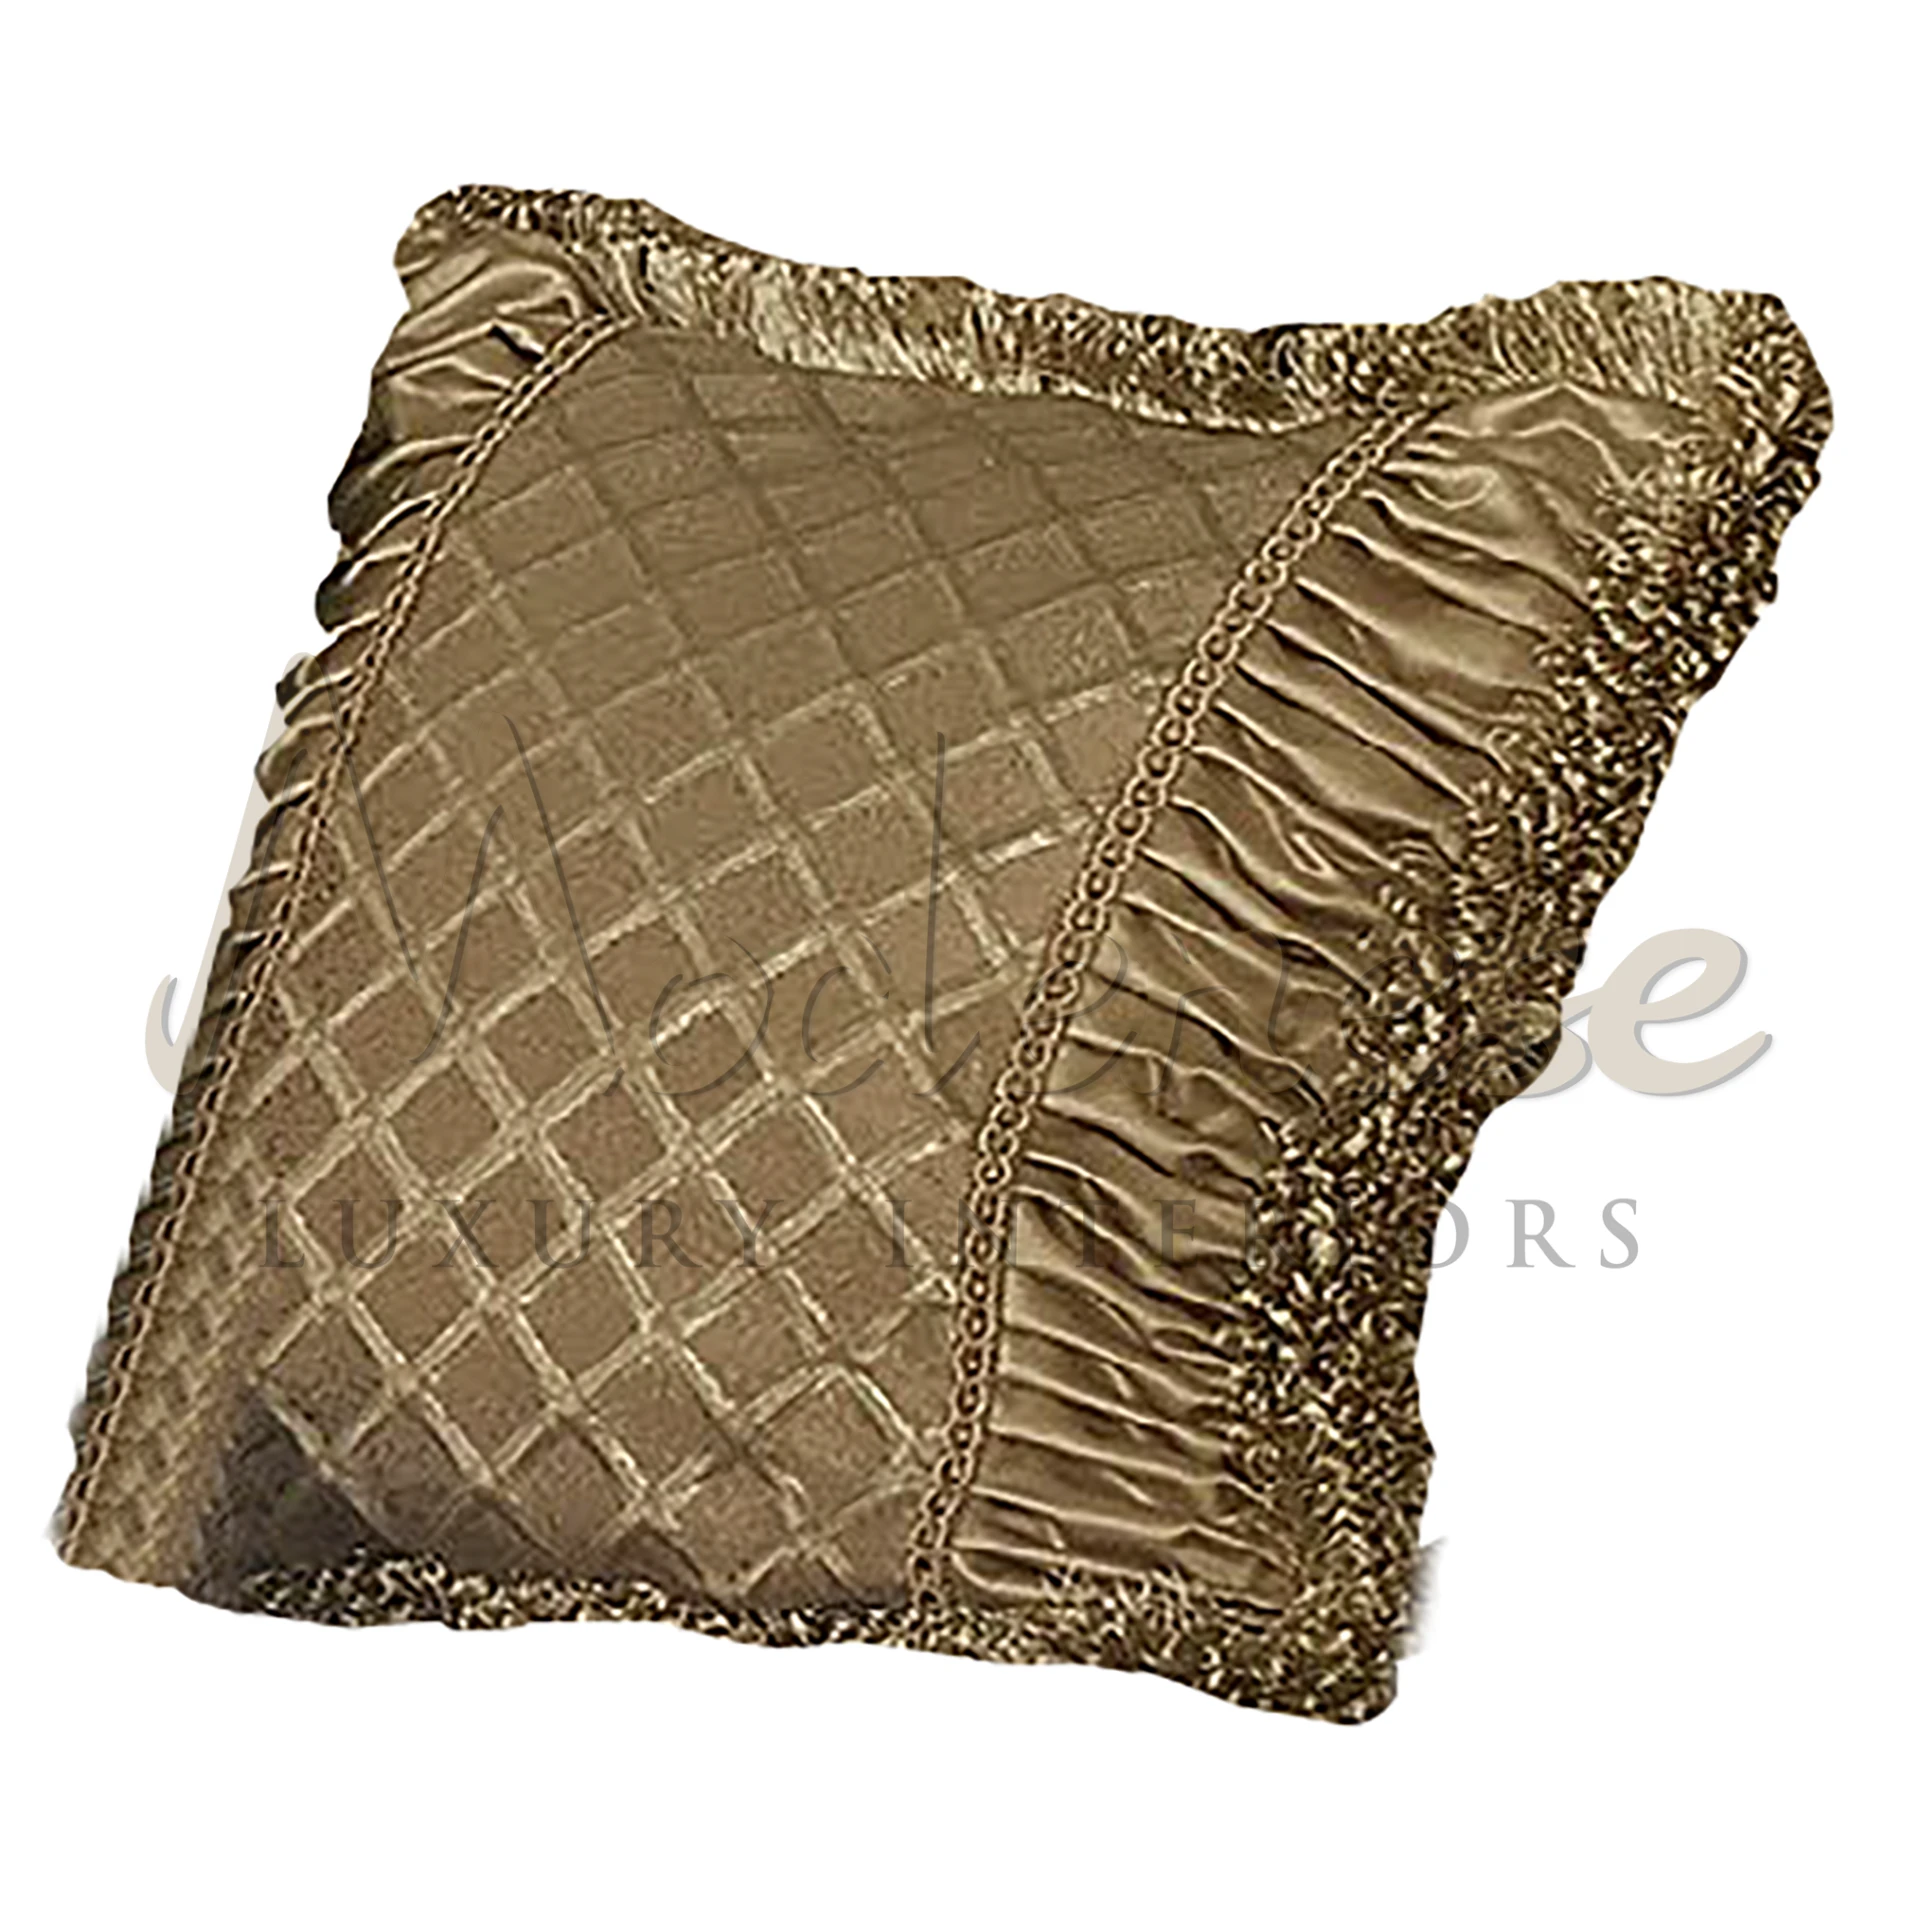 Traditional Designer Pillow with intricate patterns, showcasing the refined craftsmanship and timeless beauty of luxury textiles.